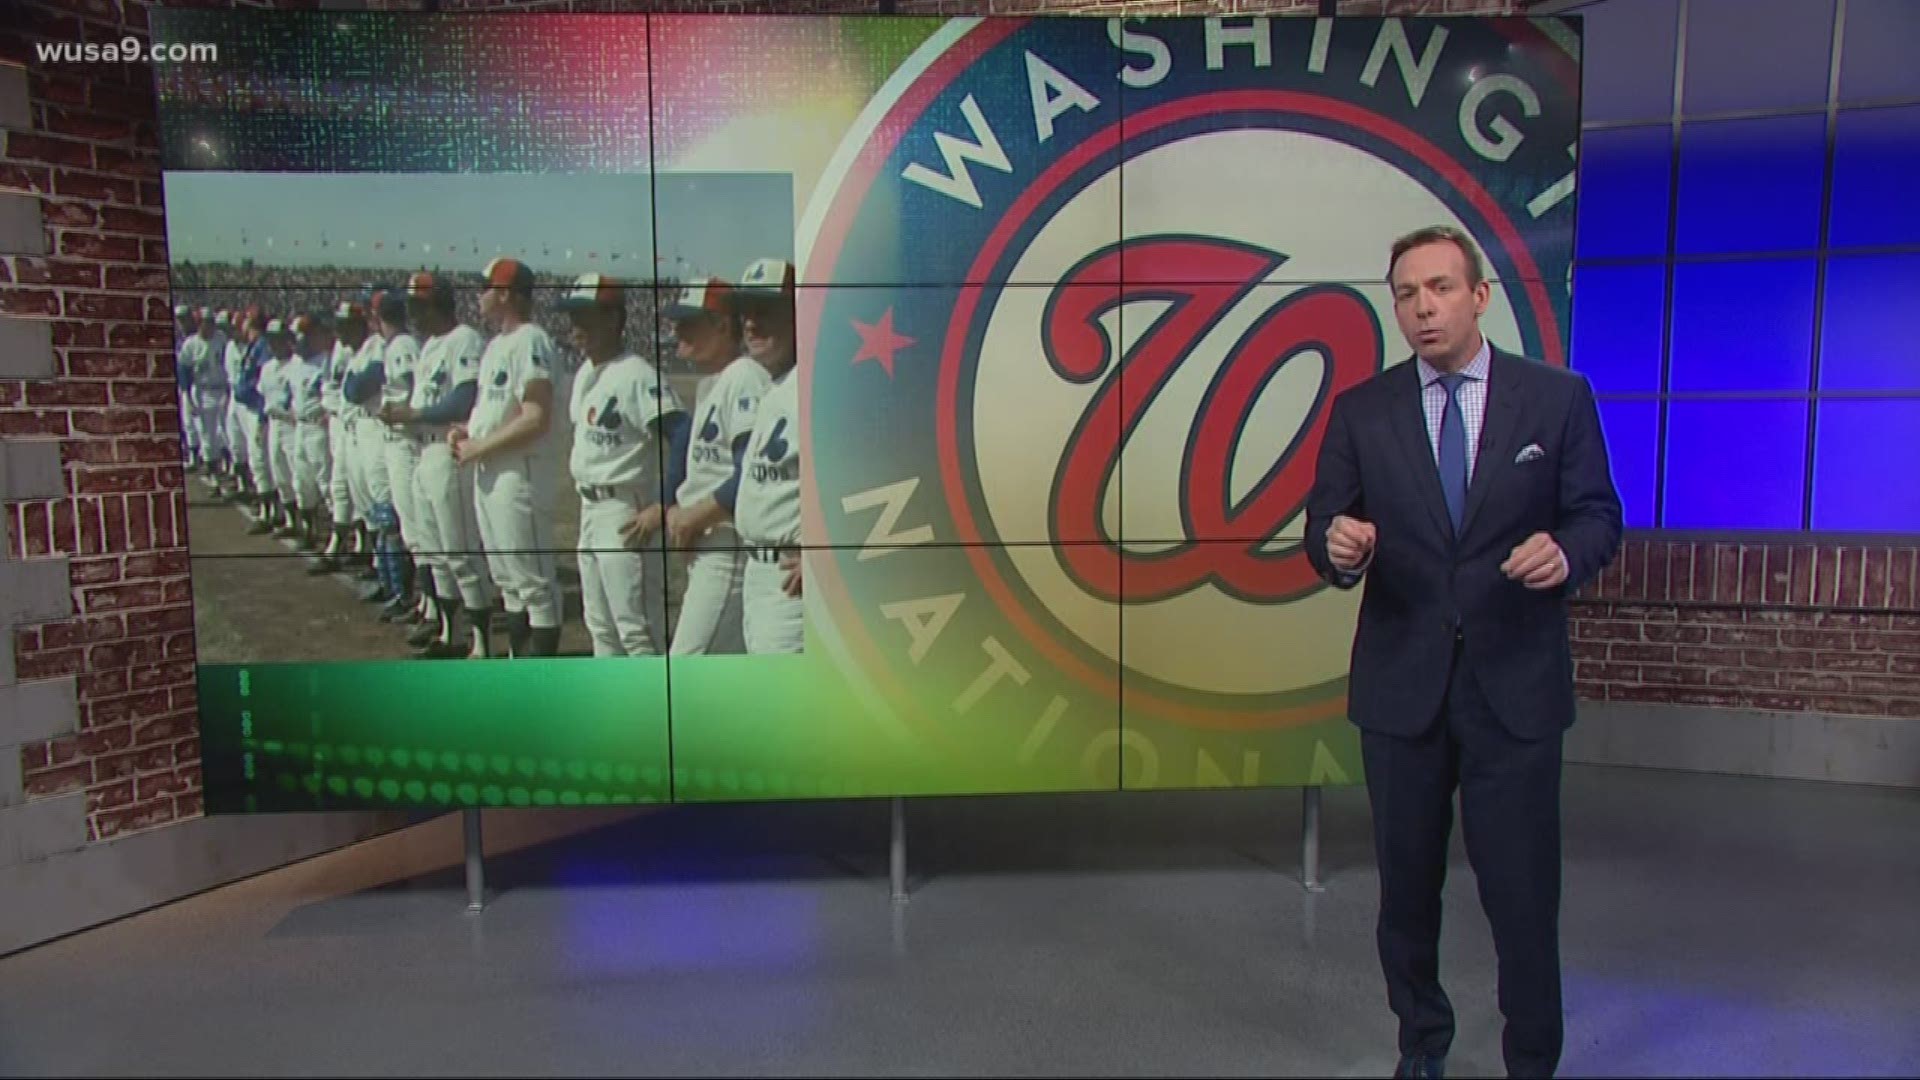 The nationals prepare to play in the World Series.